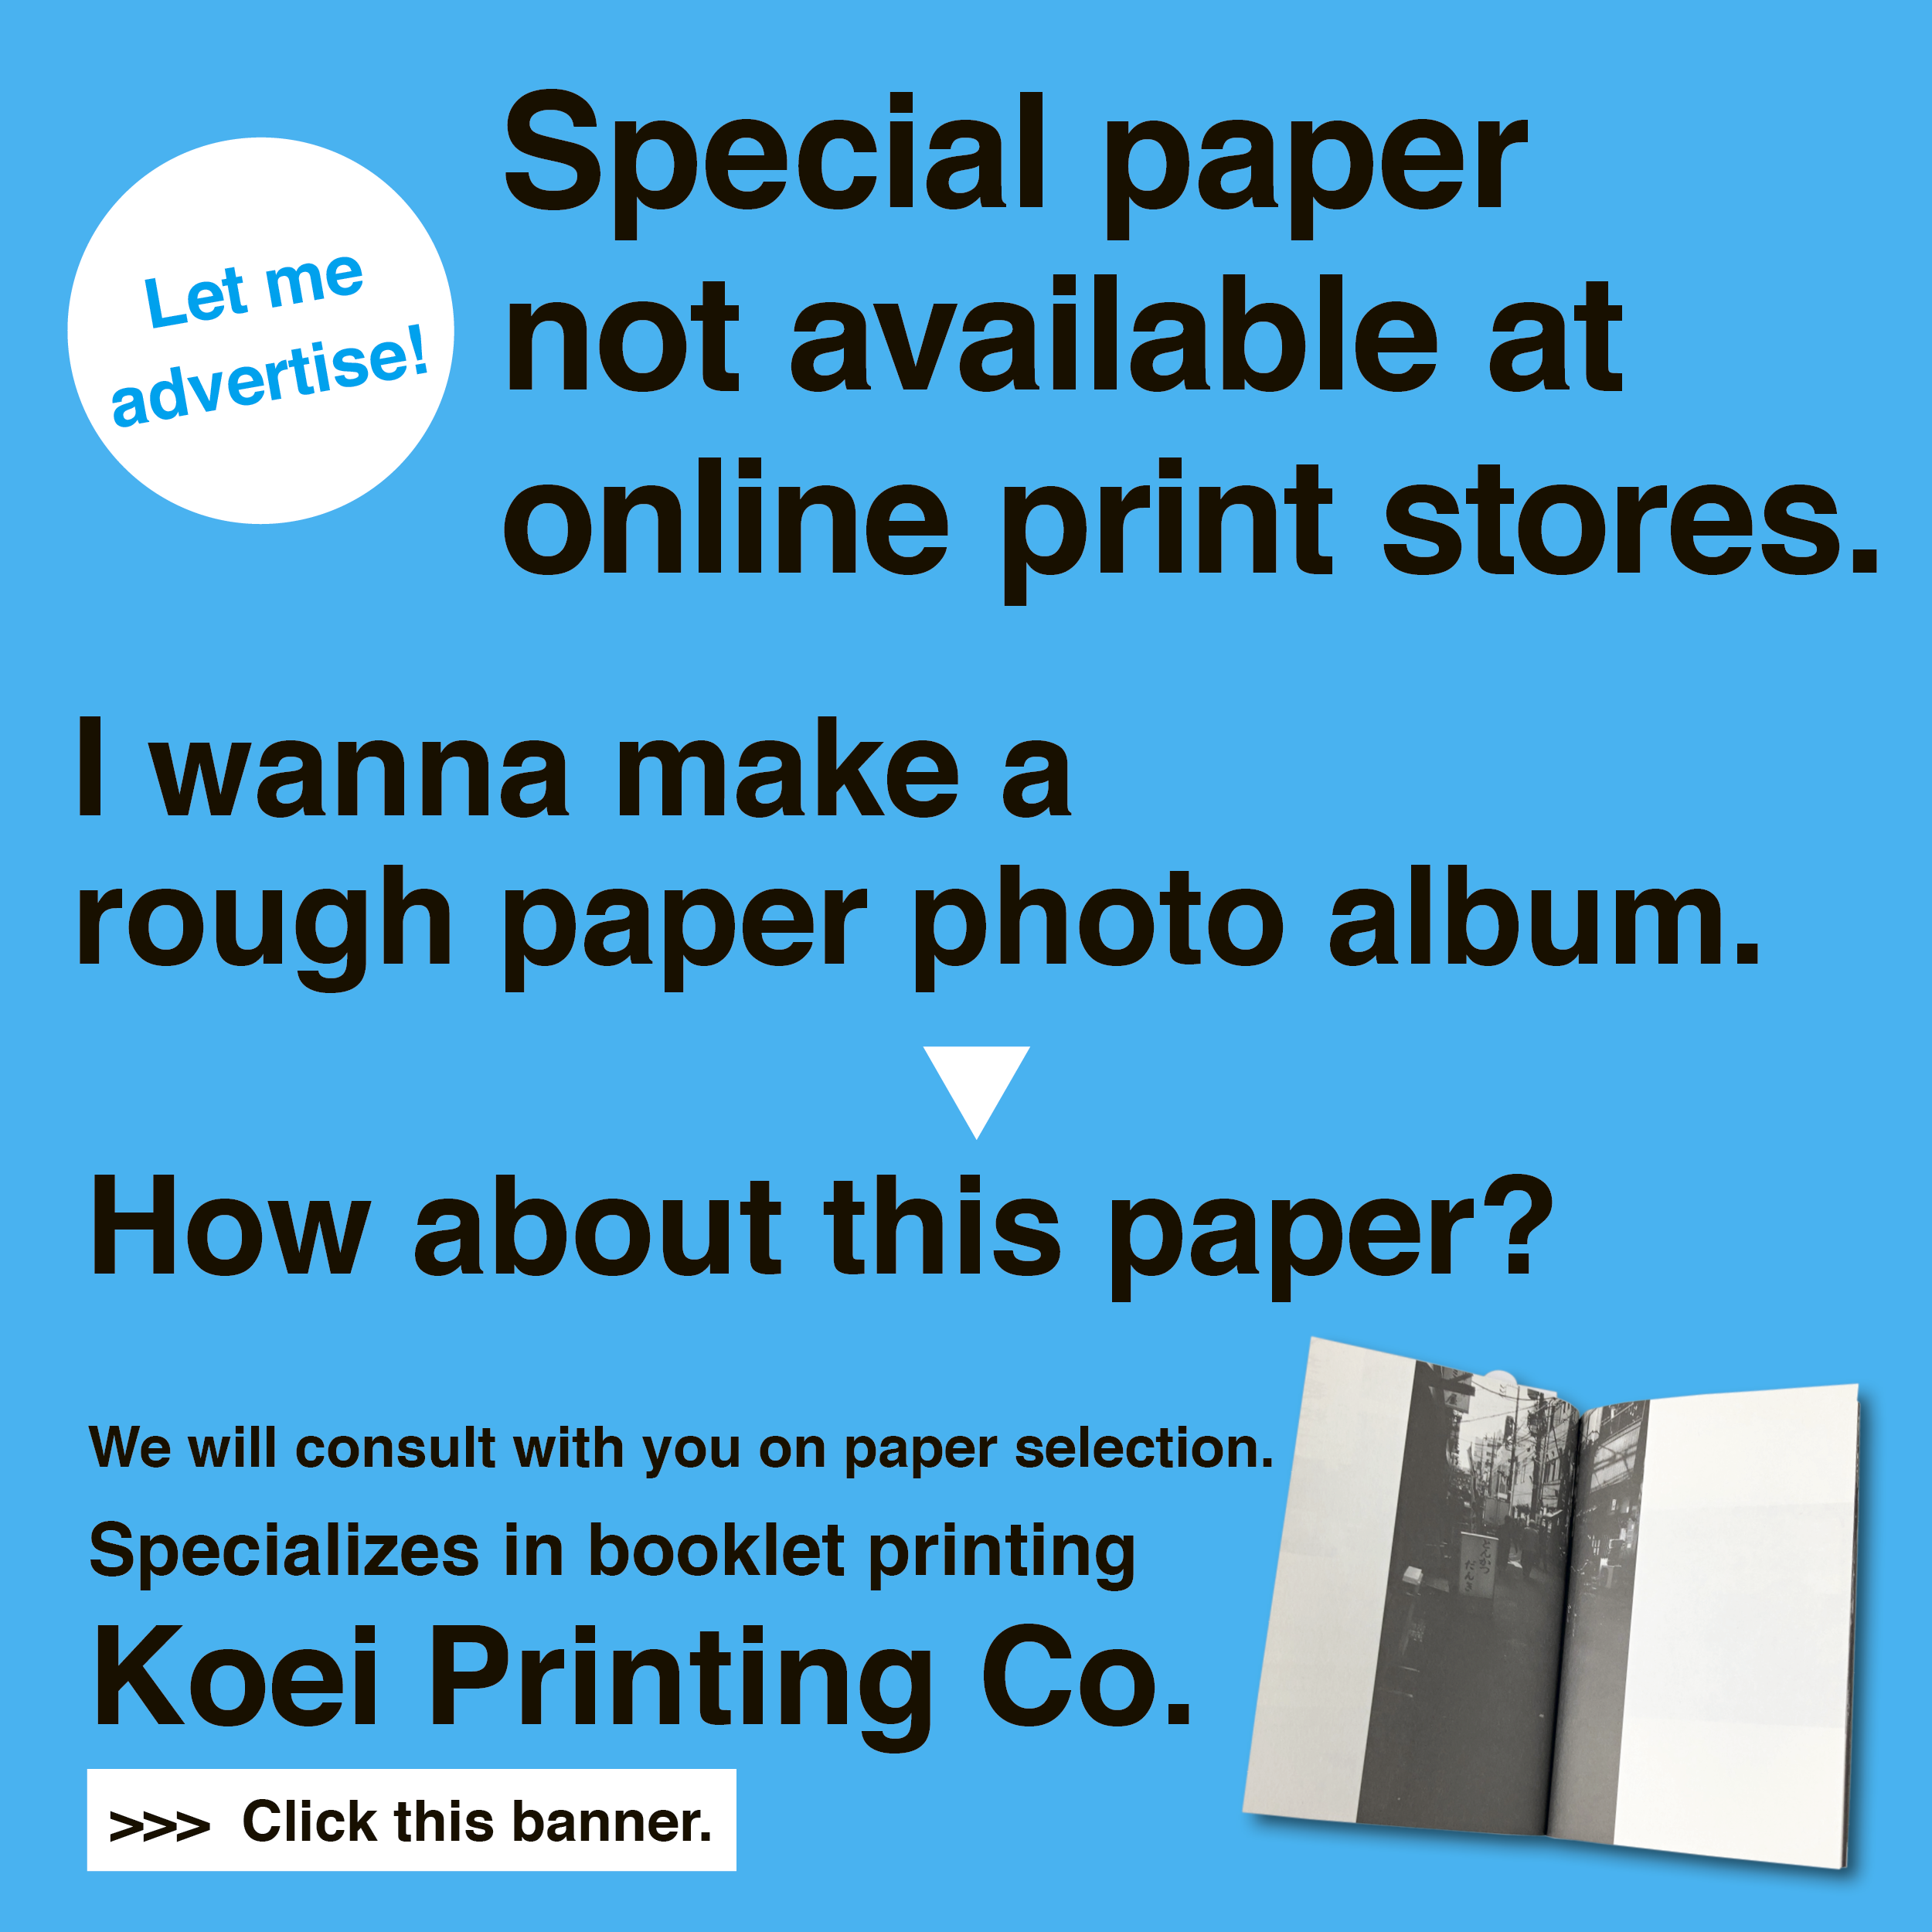 Special paper not available at online print stores.